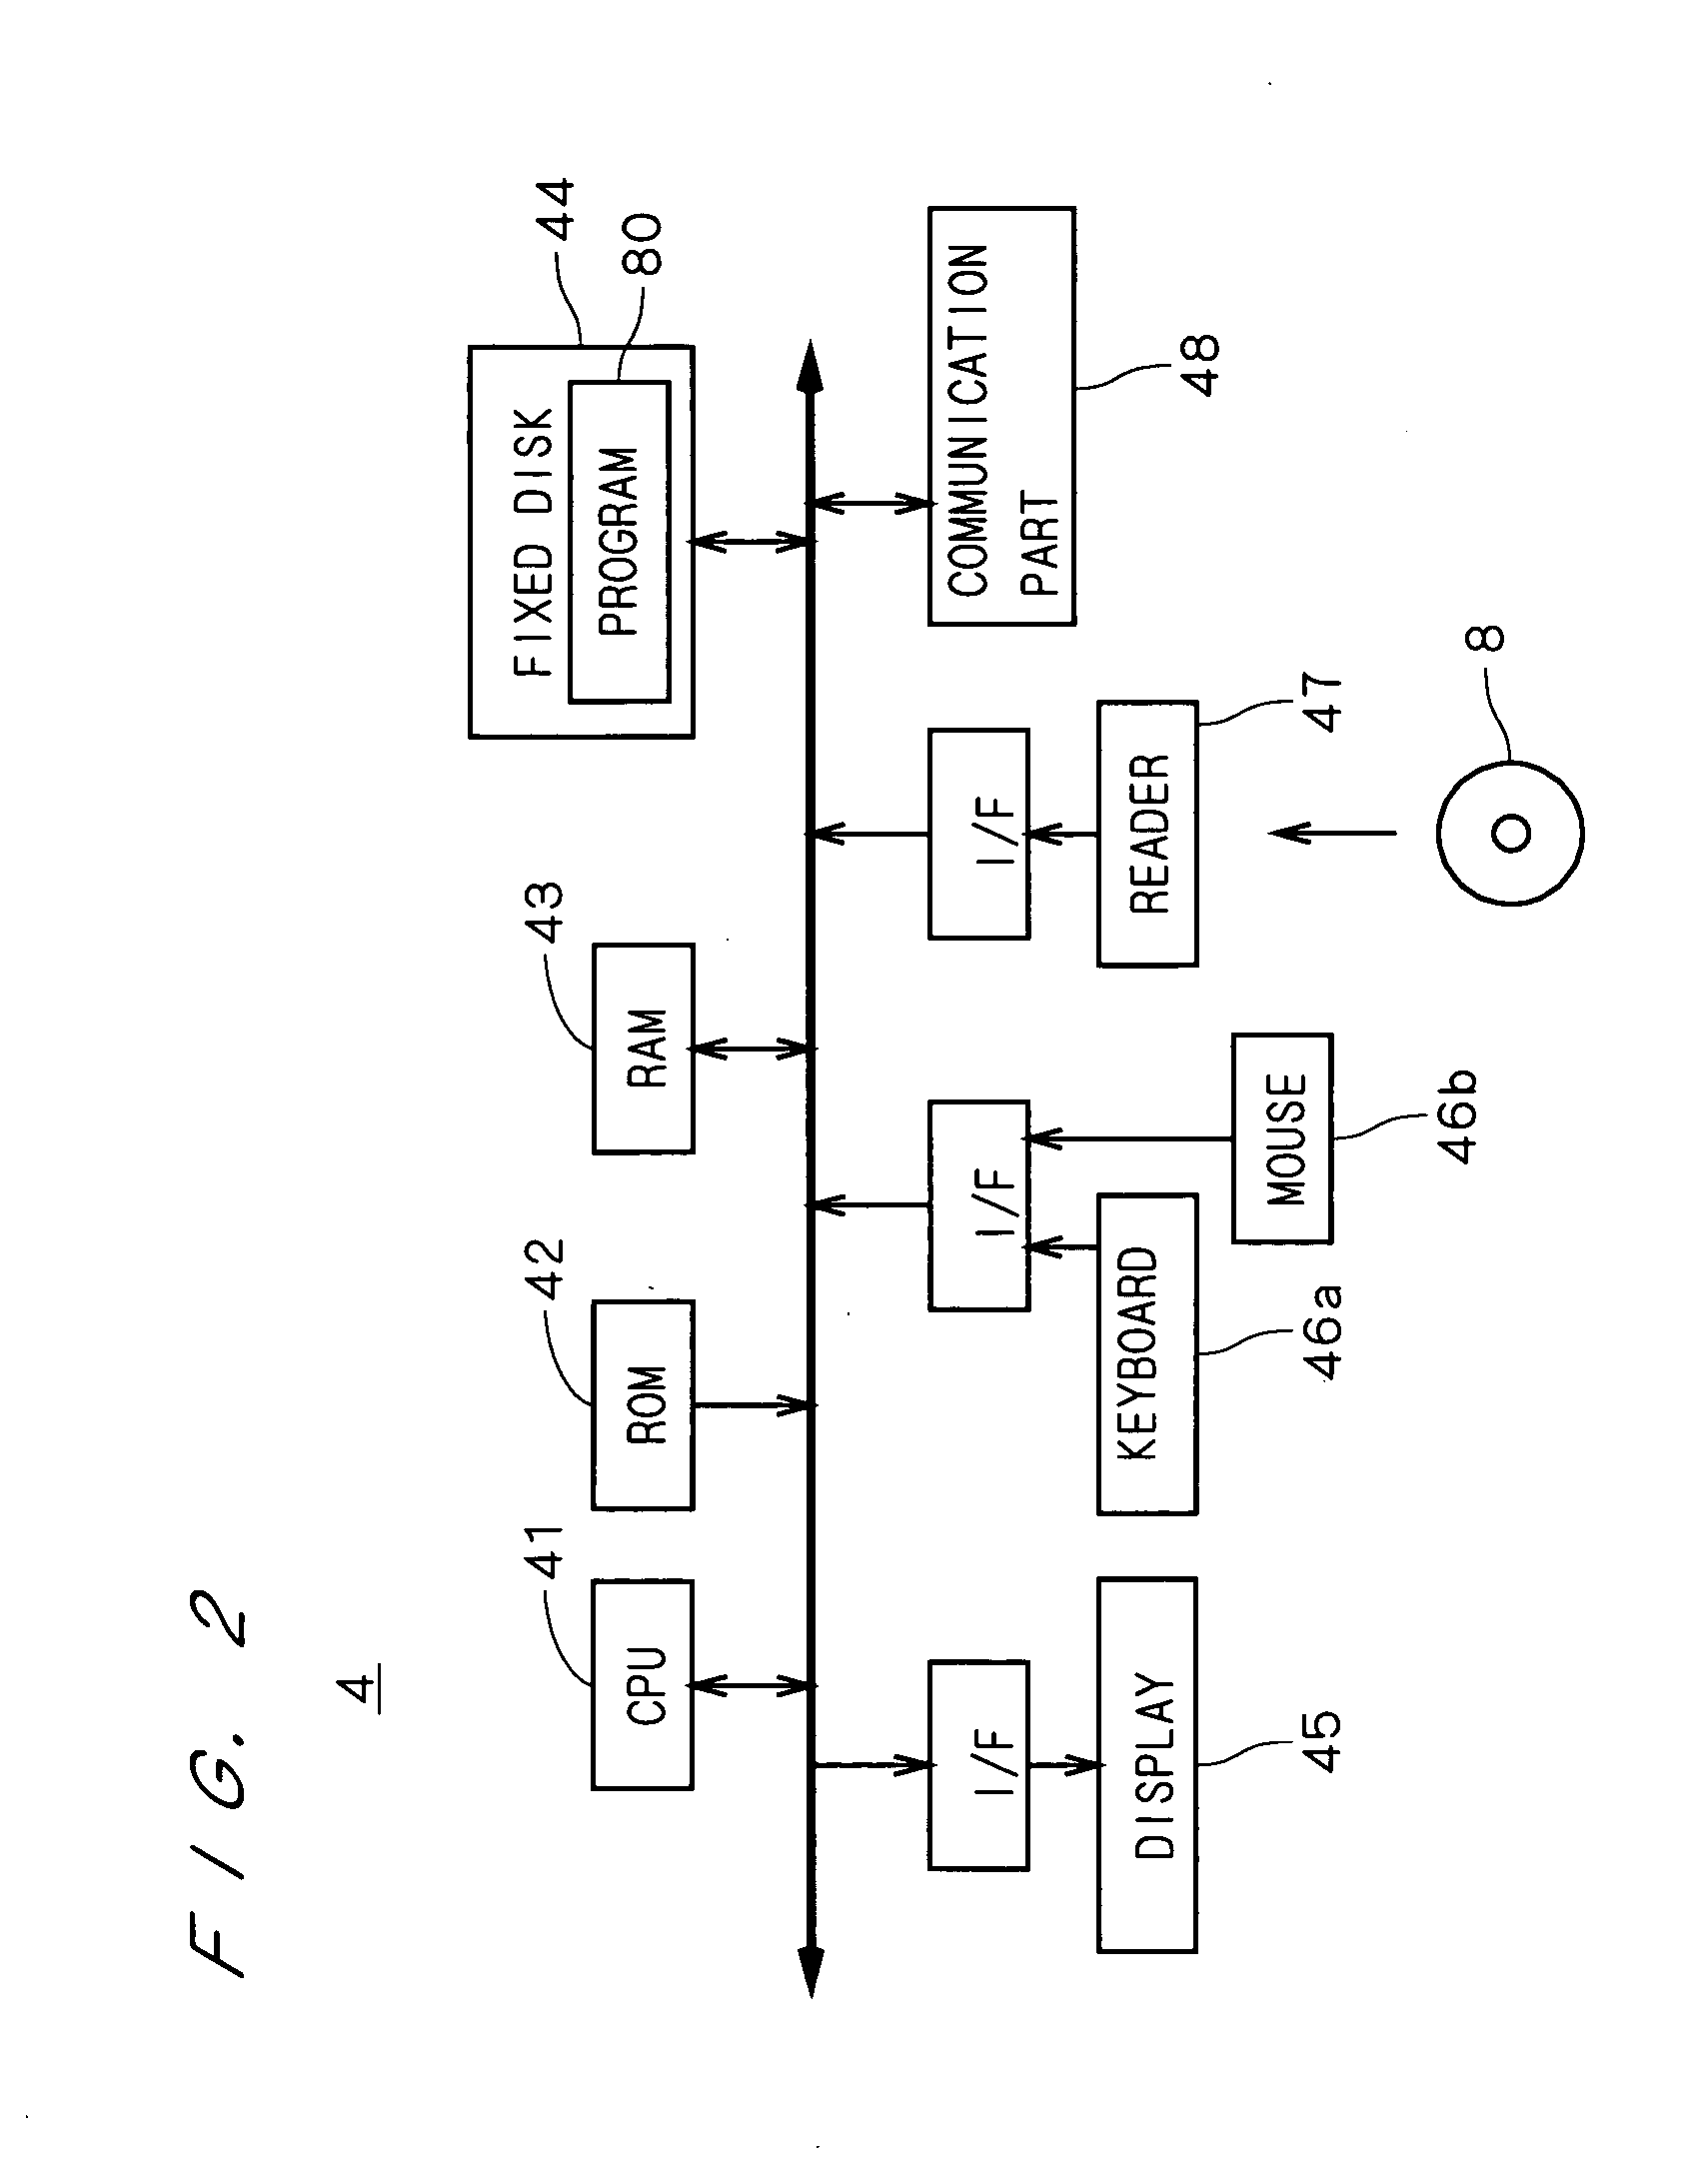 Apparatus and method for inspecting pattern